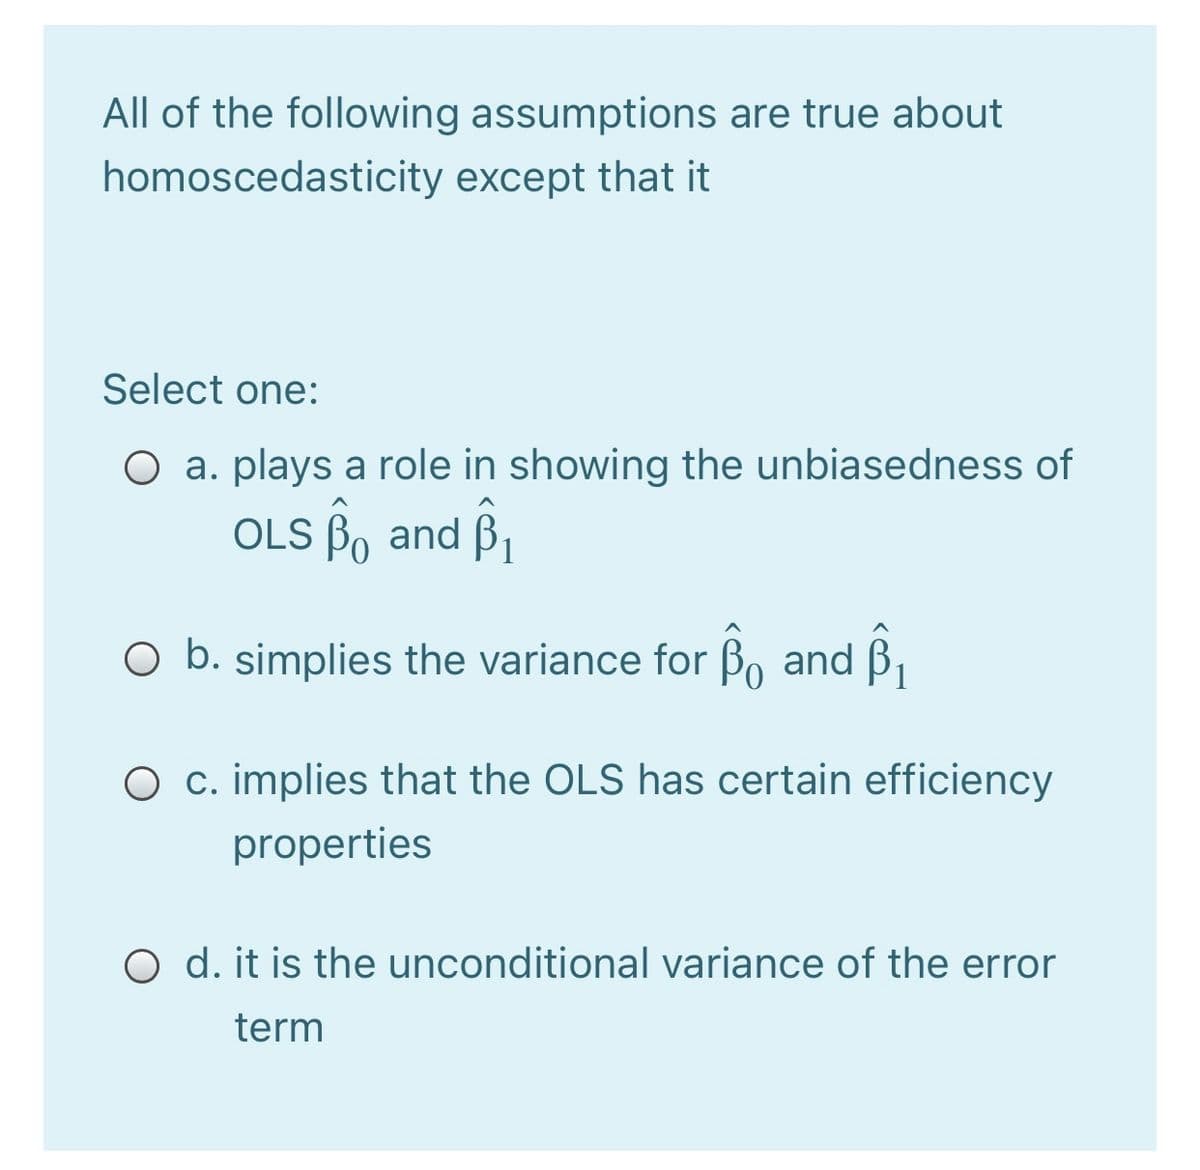 All of the following assumptions are true about
homoscedasticity except that it
Select one:
O a. plays a role in showing the unbiasedness of
OLS Bo and B,
O b. simplies the variance for Bo and B,
O c. implies that the OLS has certain efficiency
properties
O d. it is the unconditional variance of the error
term
